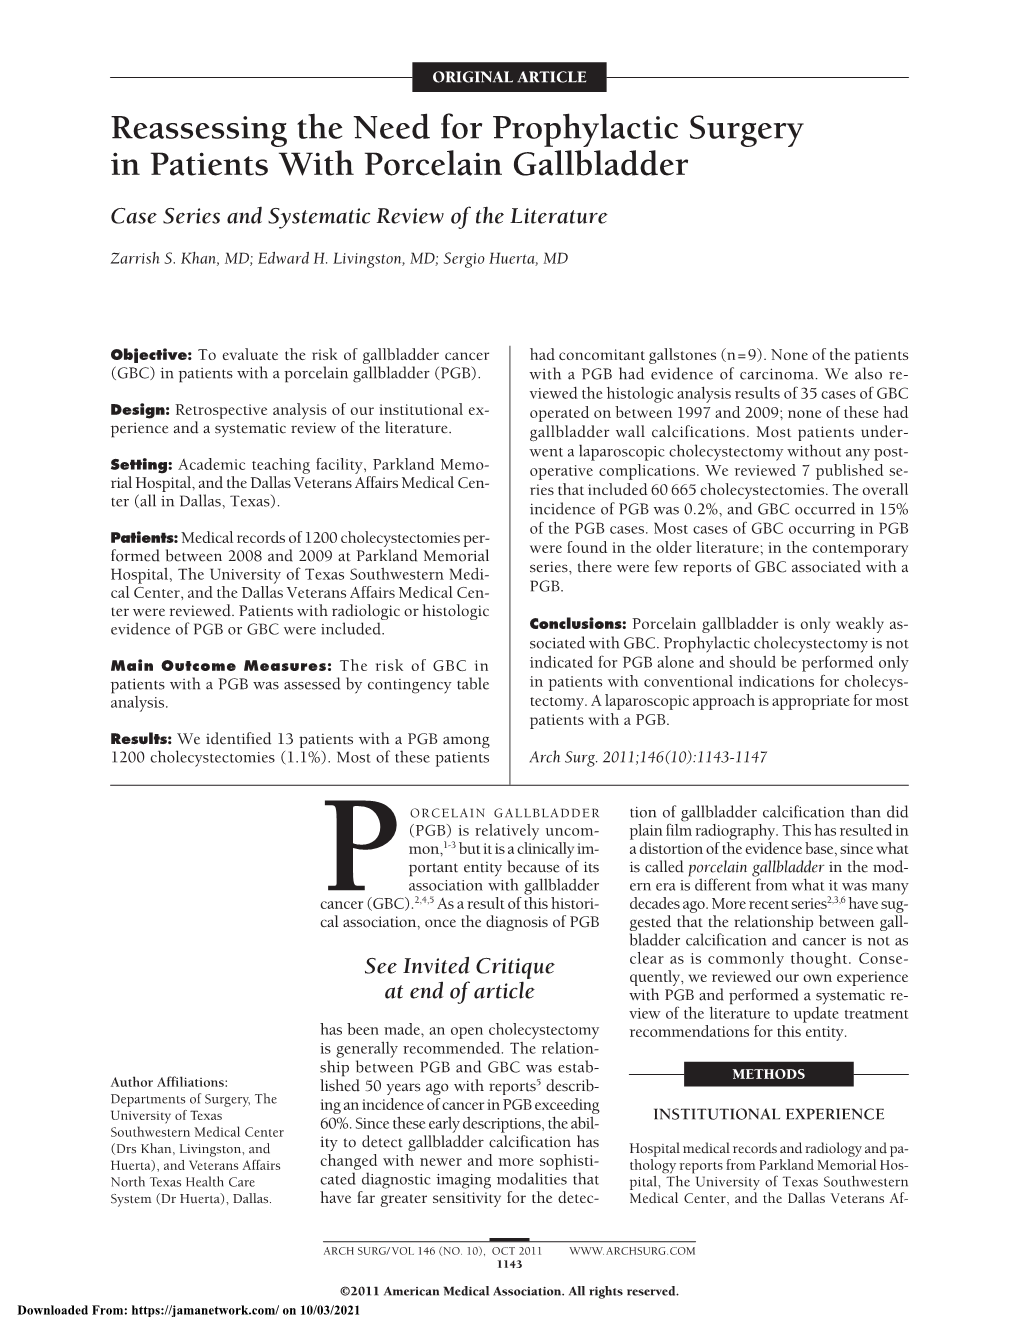 Reassessing the Need for Prophylactic Surgery in Patients with Porcelain Gallbladder Case Series and Systematic Review of the Literature